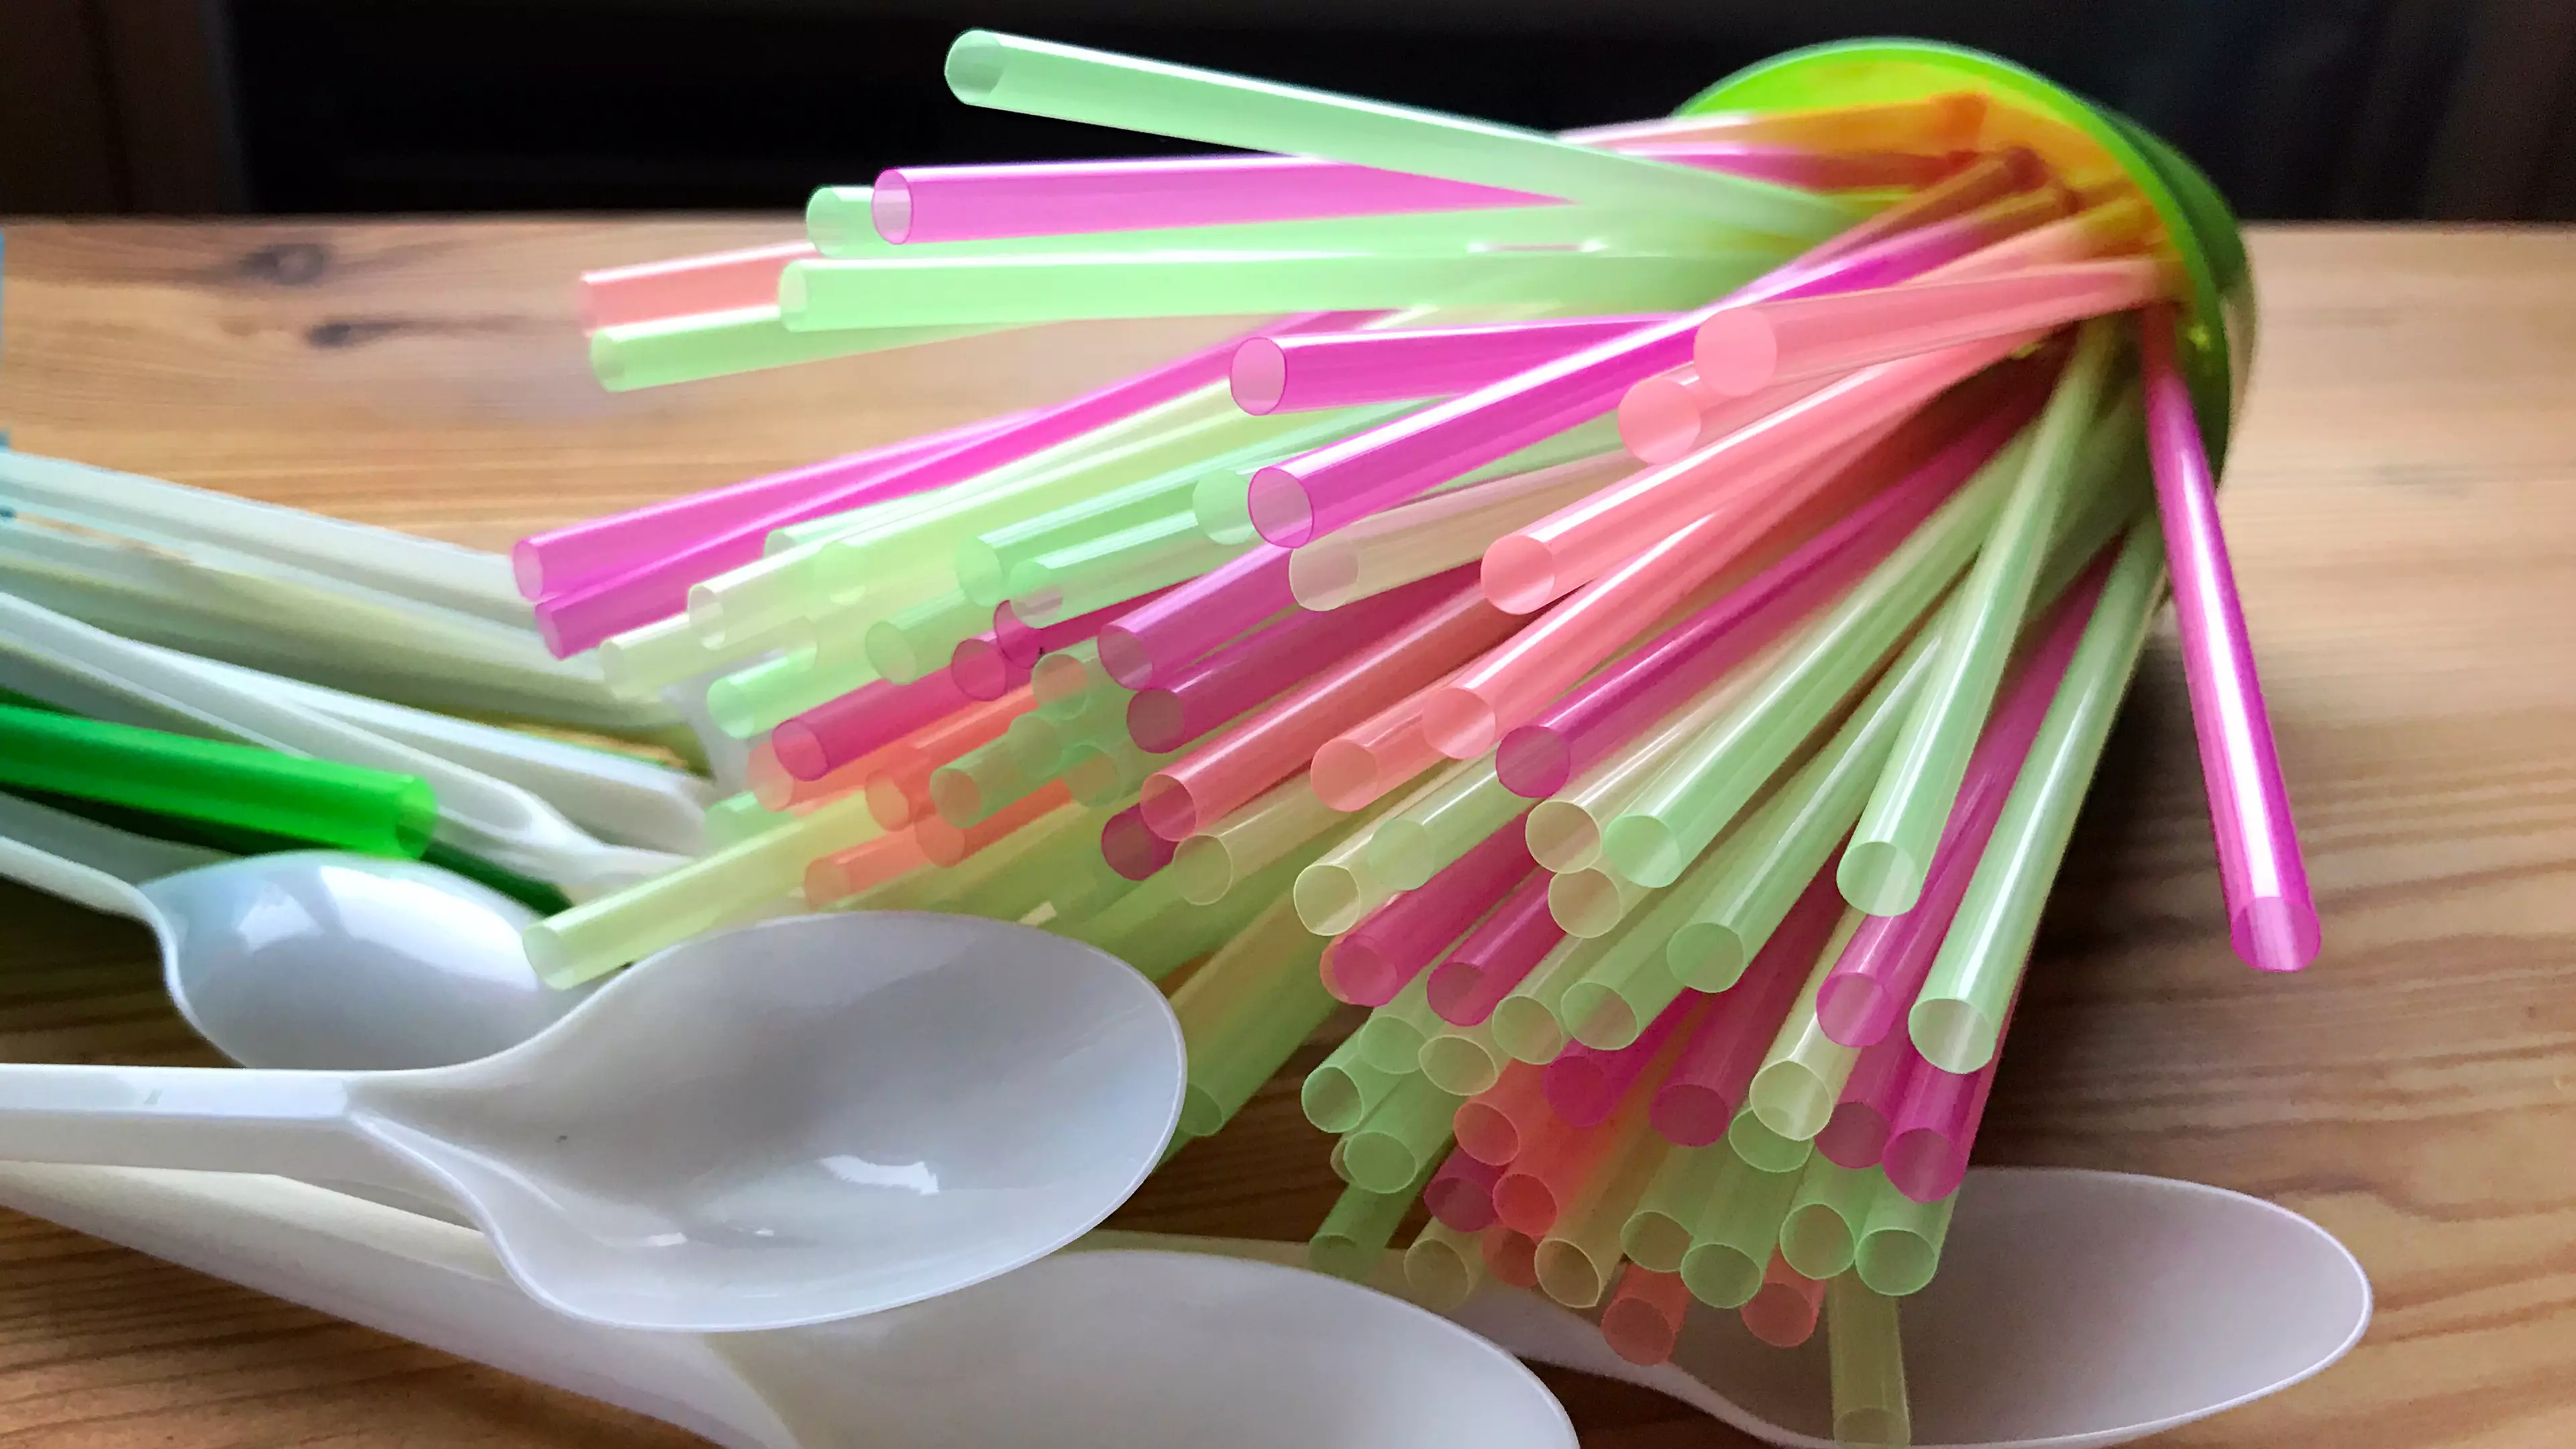 South Australia Will Phase Out Single Use Plastic Cutlery And Straws Next Year